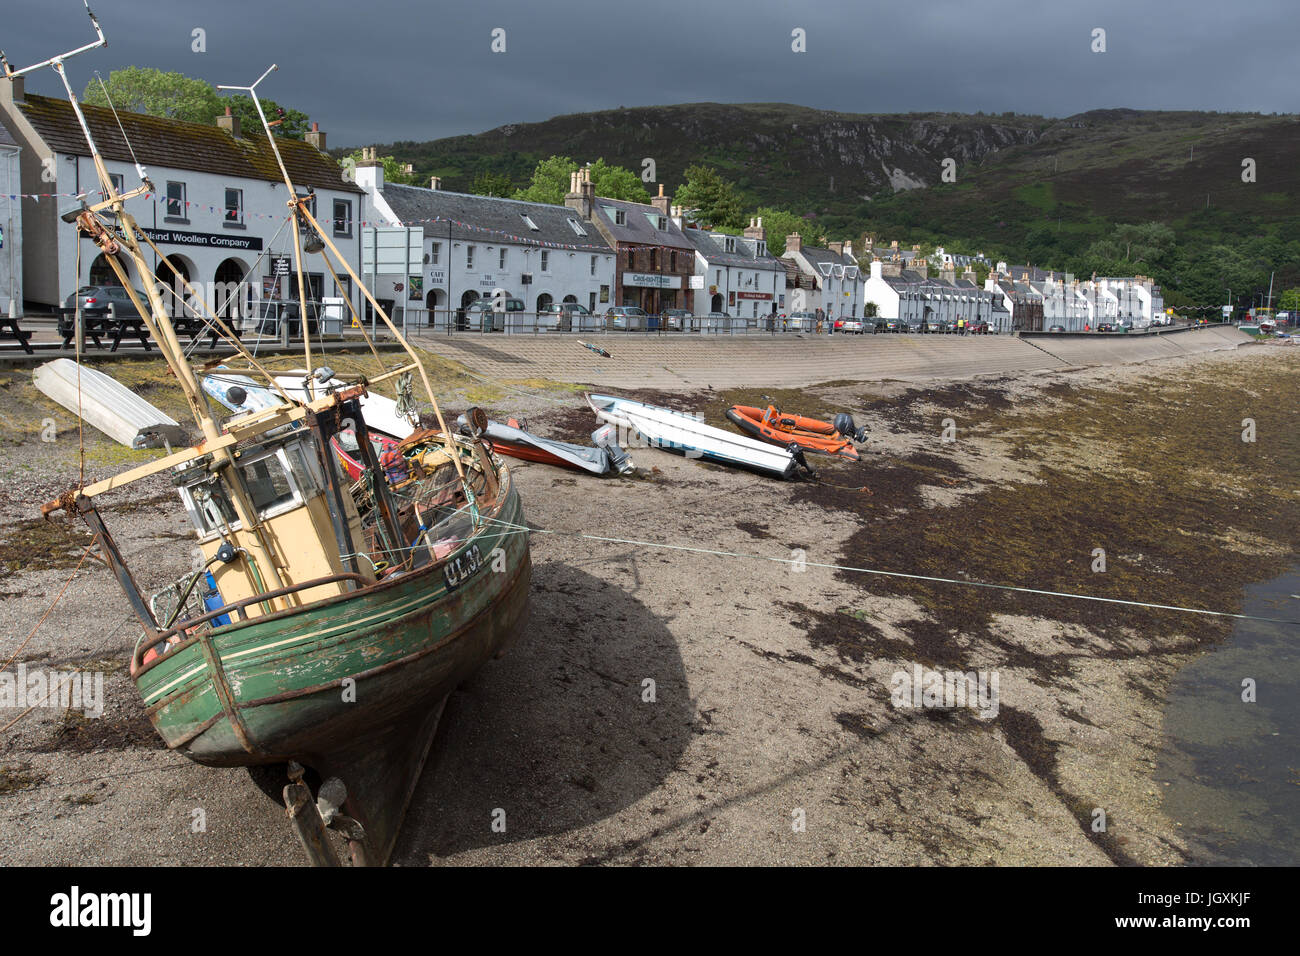 Town of Ullapool, Scotland. Picturesque view of Ullapool’s waterfront at low tide, with Shore Street in the background. Stock Photo